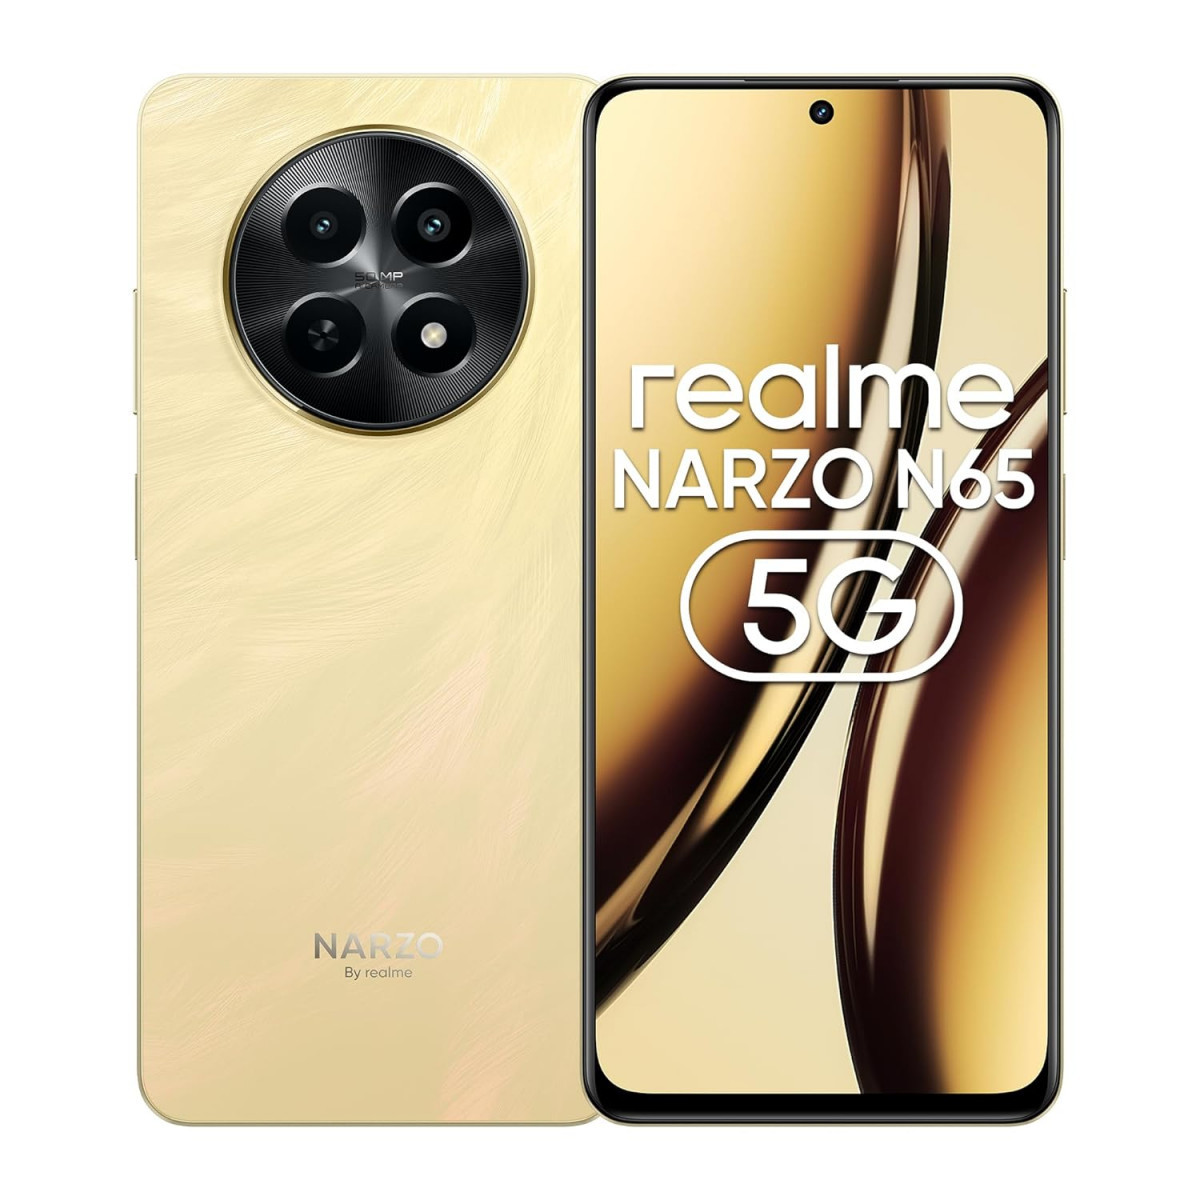 realme NARZO N65 5G Amber Gold 4GB RAM 128GB Storage India039s 1st D6300 5G Chipset  Ultra Slim Design  120Hz Eye Comfort Display  50MP AI Camera Charger in The Box